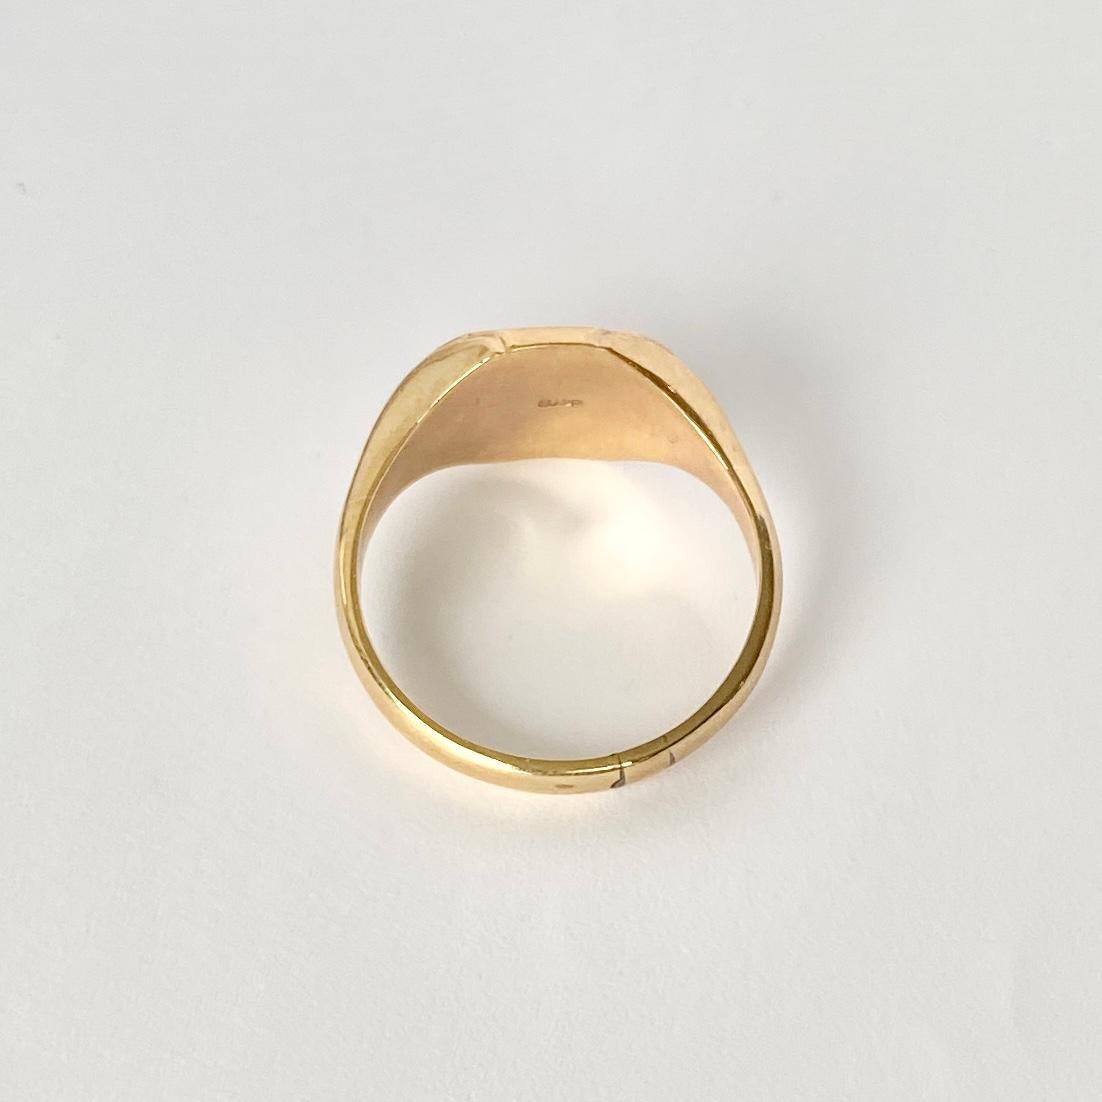 Vintage 9 Carat Gold Signet Ring In Good Condition For Sale In Chipping Campden, GB